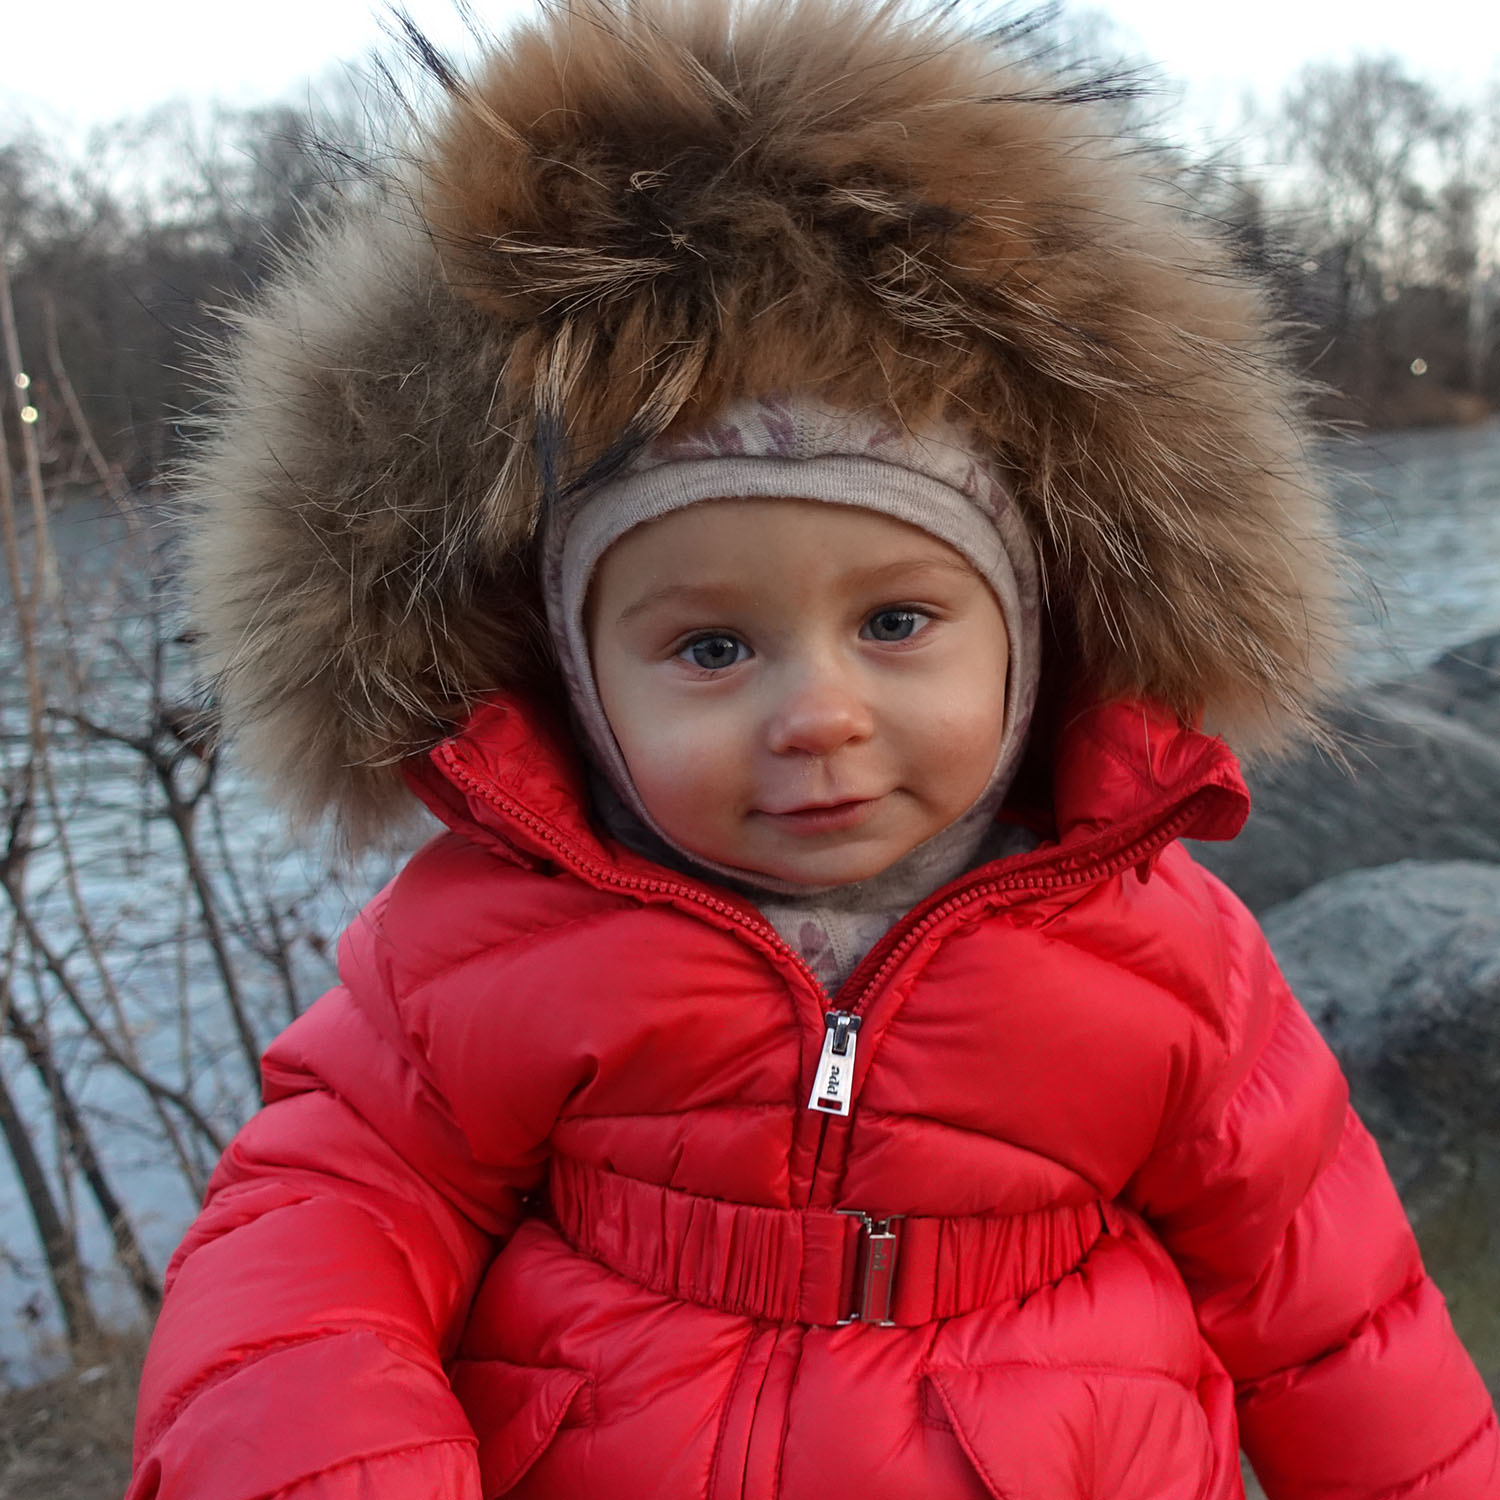 Anastasia in red coat, at twilight in Central Park